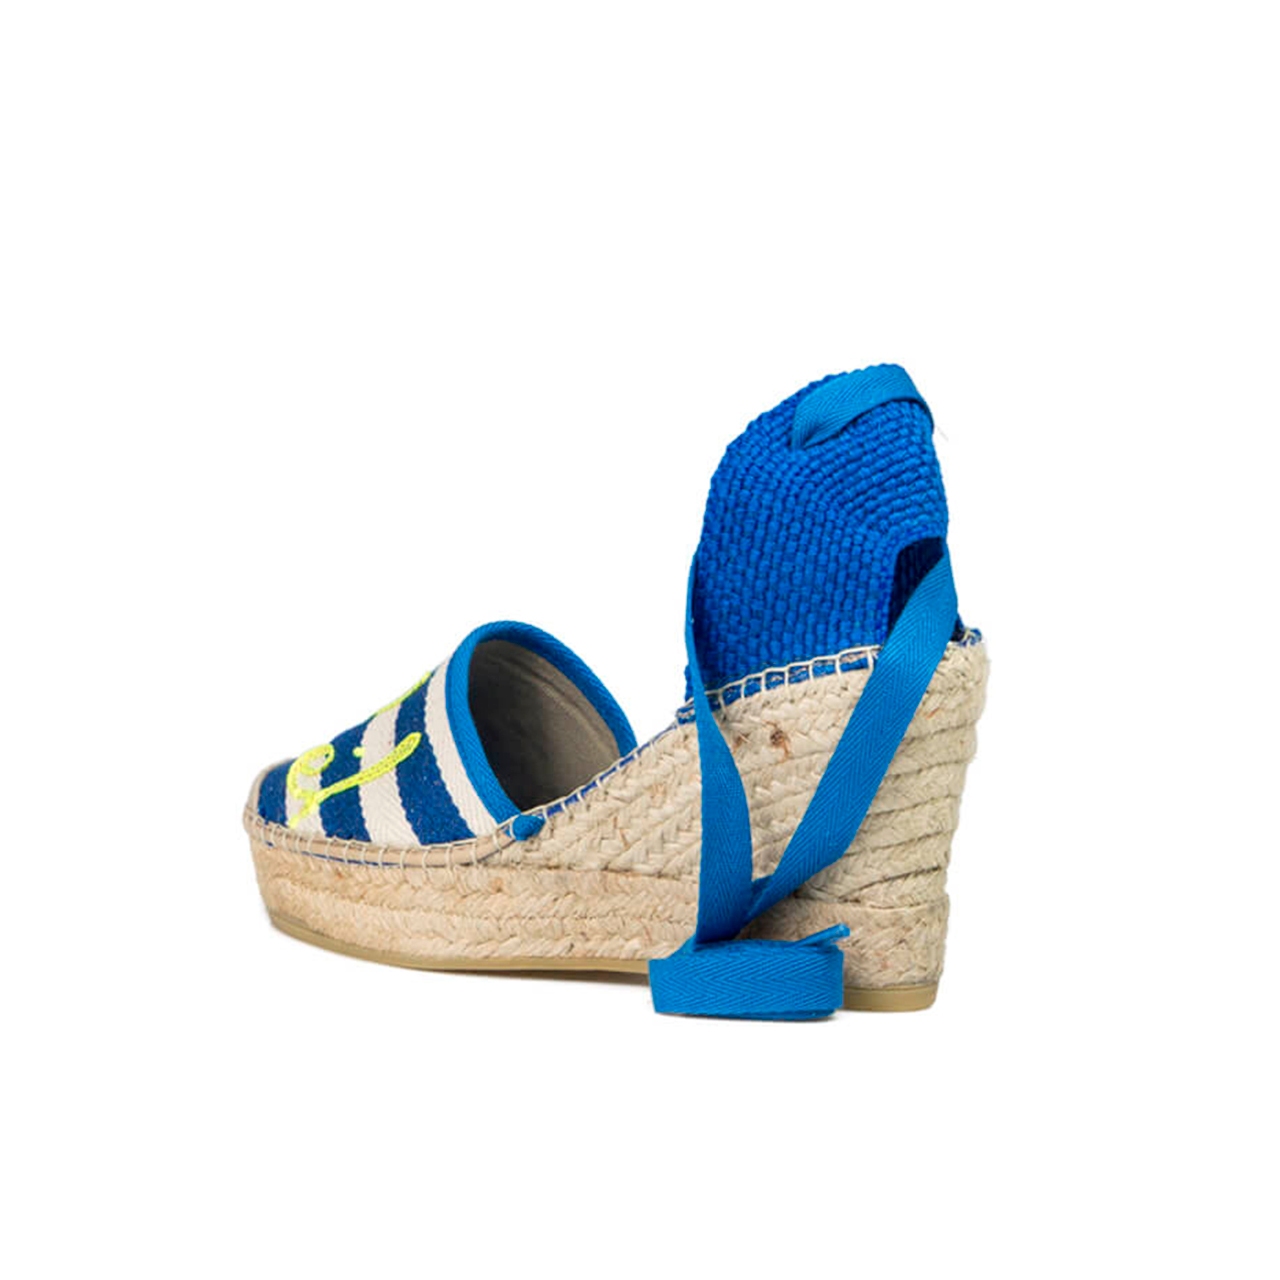 Faktisk Styre Oberst Striped Espadrilles with Text